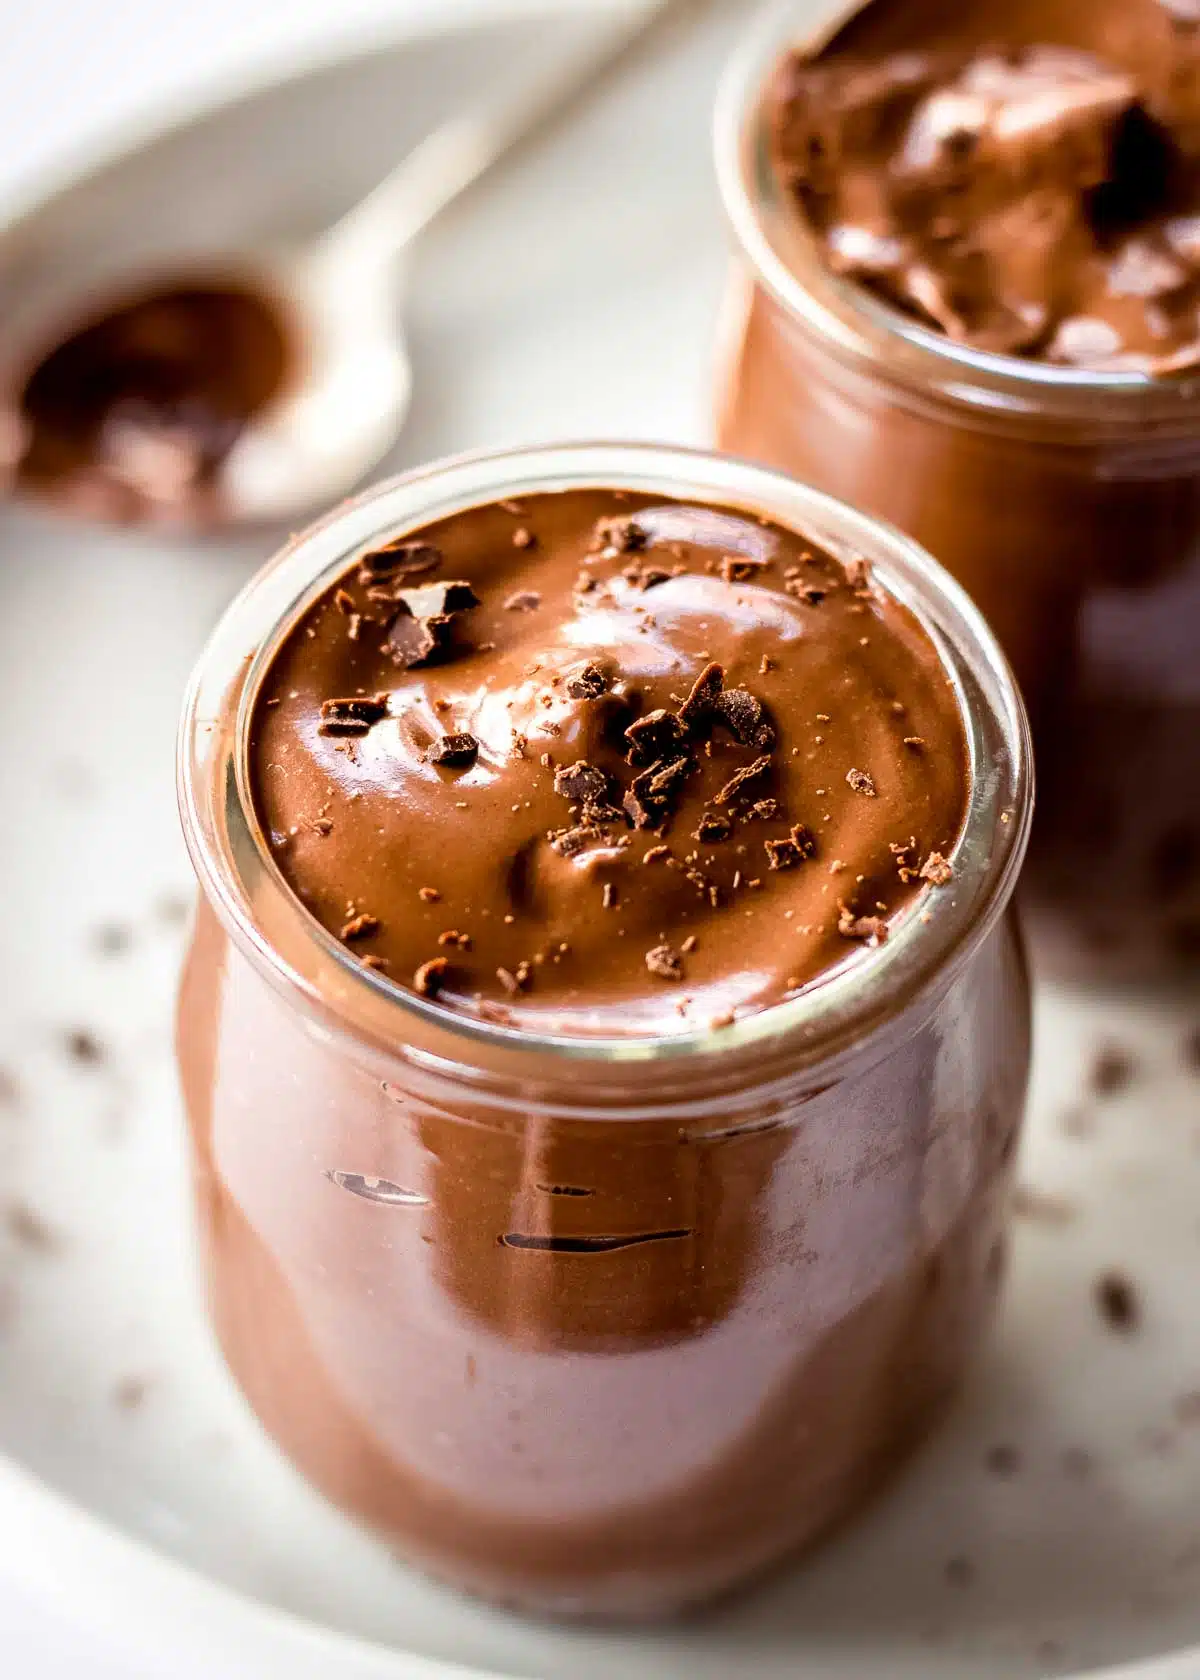 Two glass pots of avocado chocolate mousse topped with grated chocolate. A spoon is off to one side.